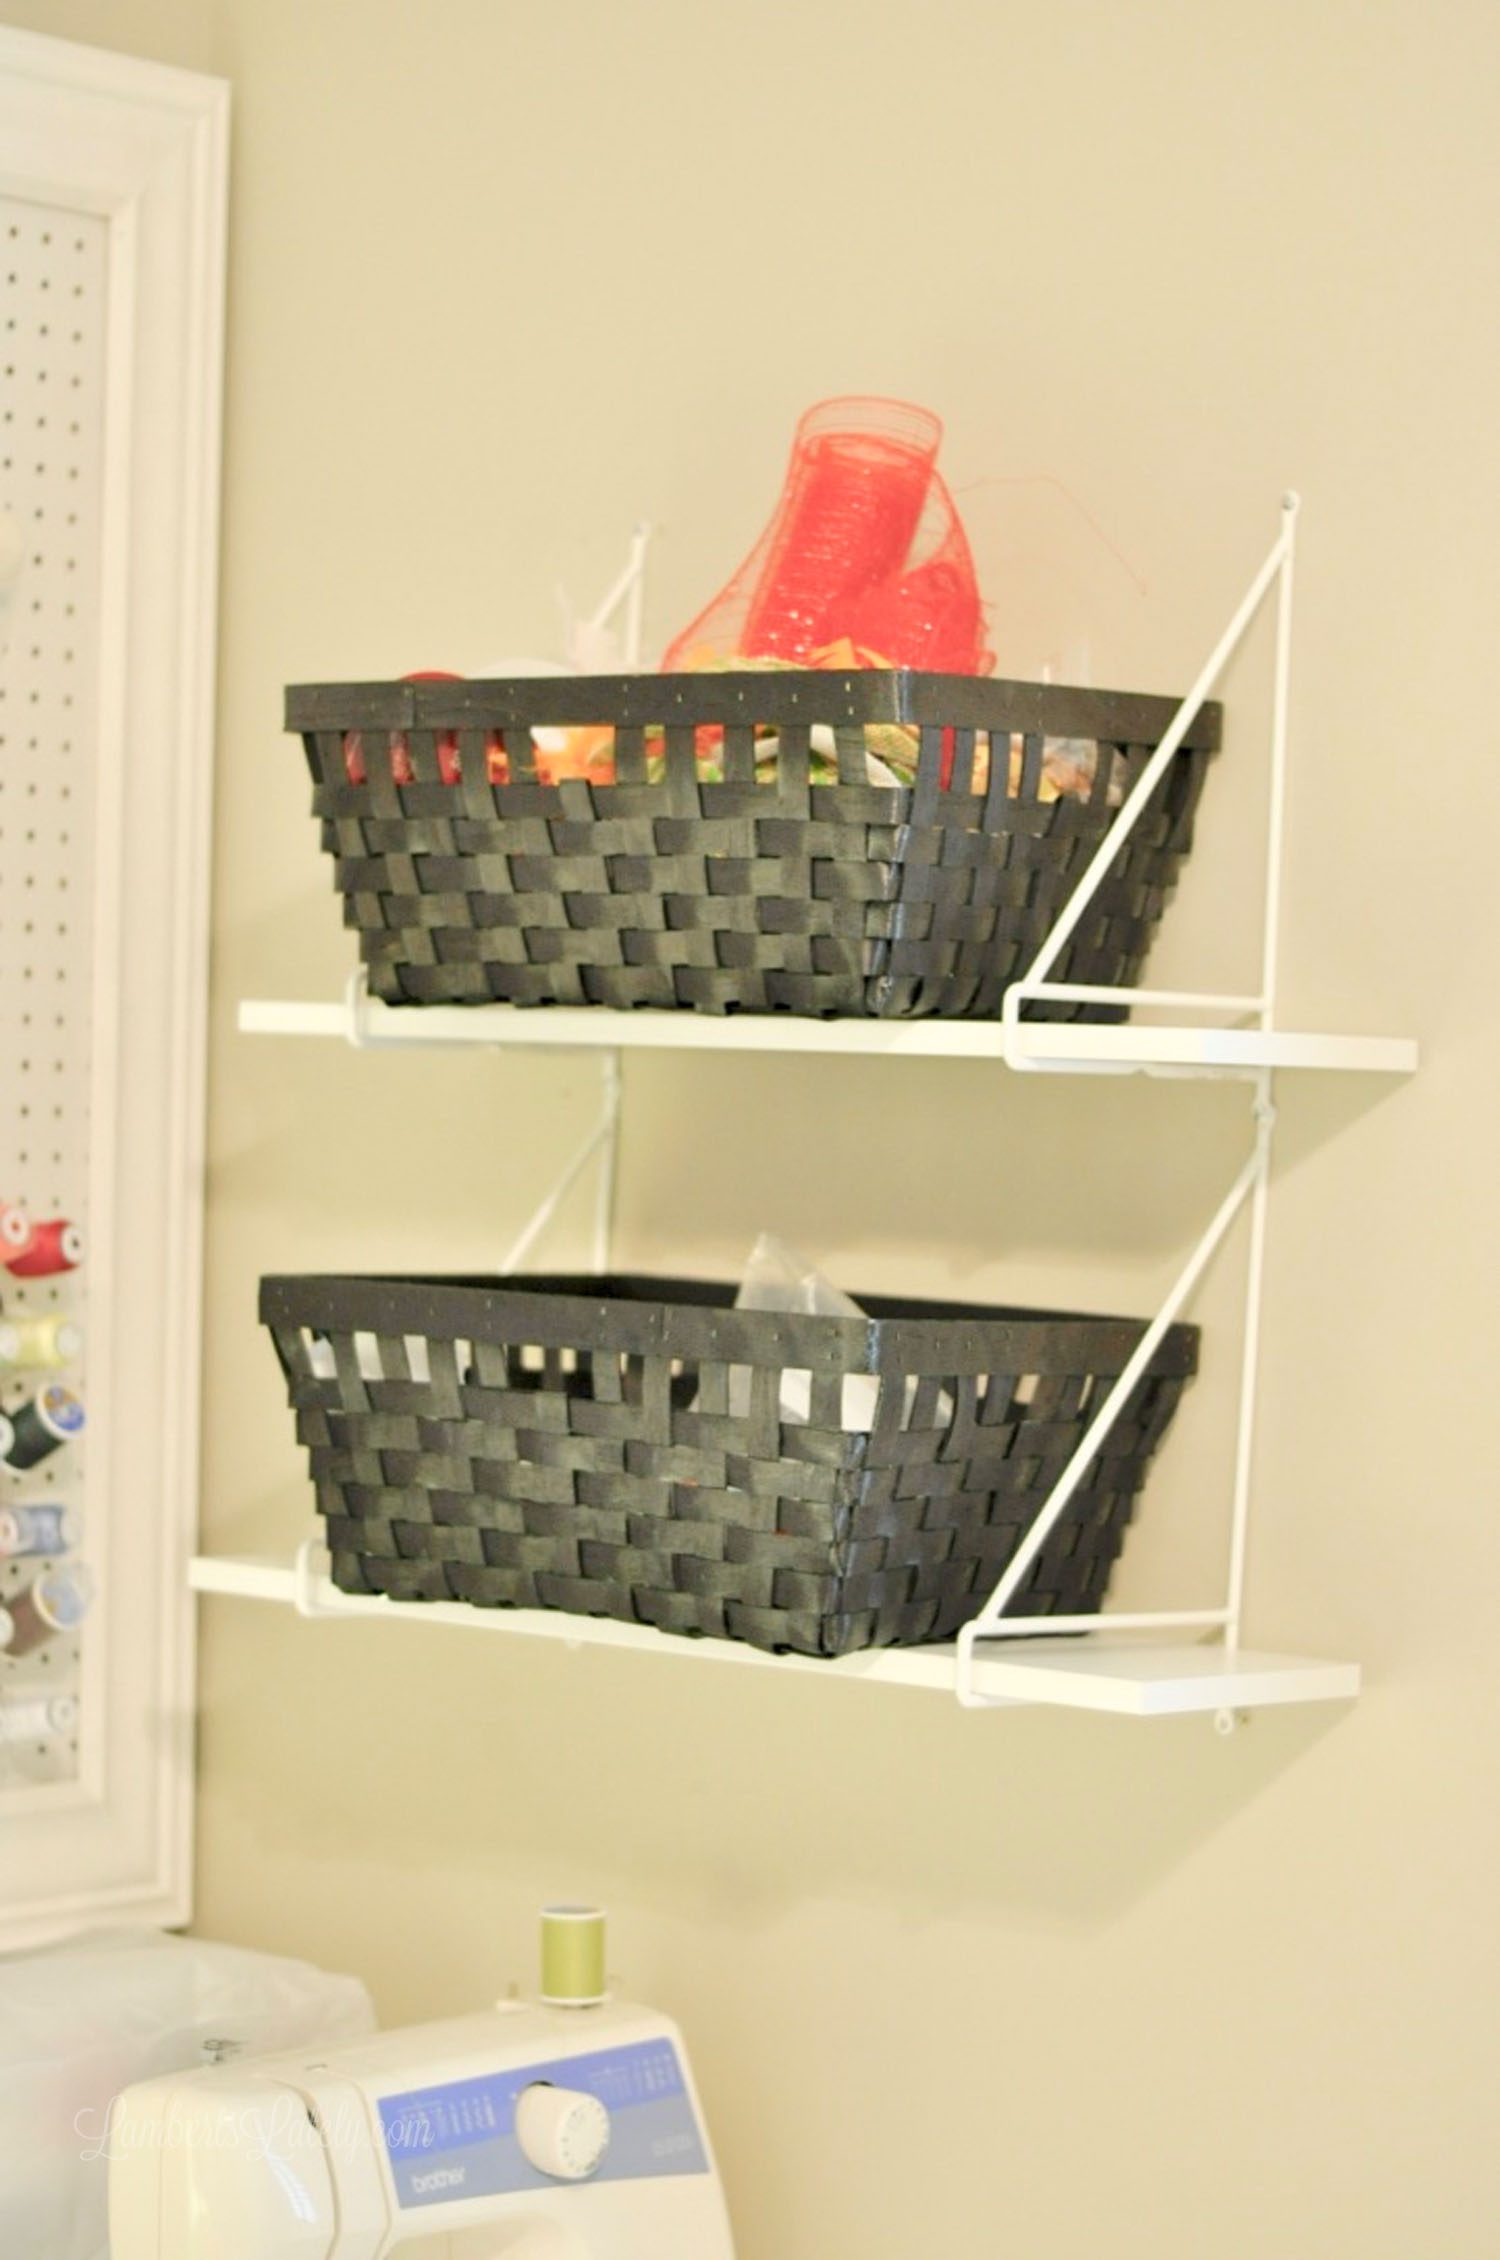 two black baskets holding craft supplies on white shelves.